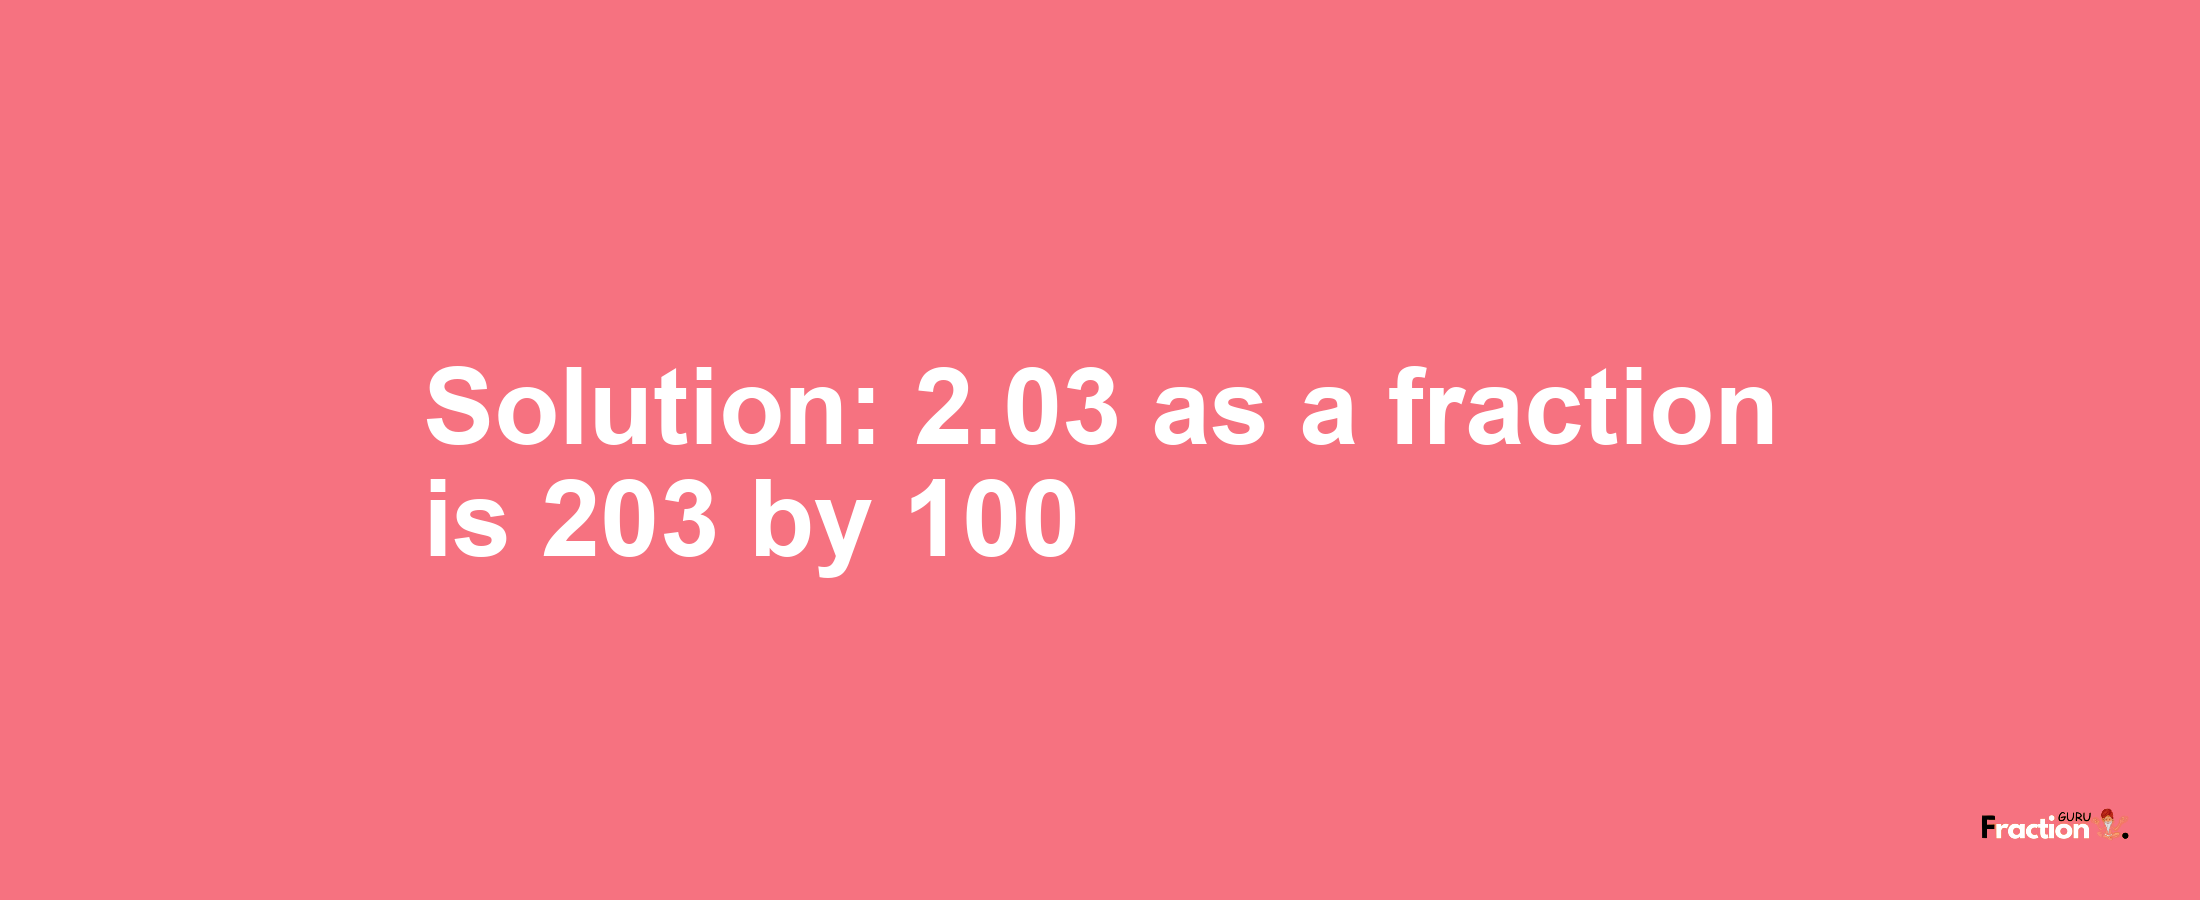 Solution:2.03 as a fraction is 203/100